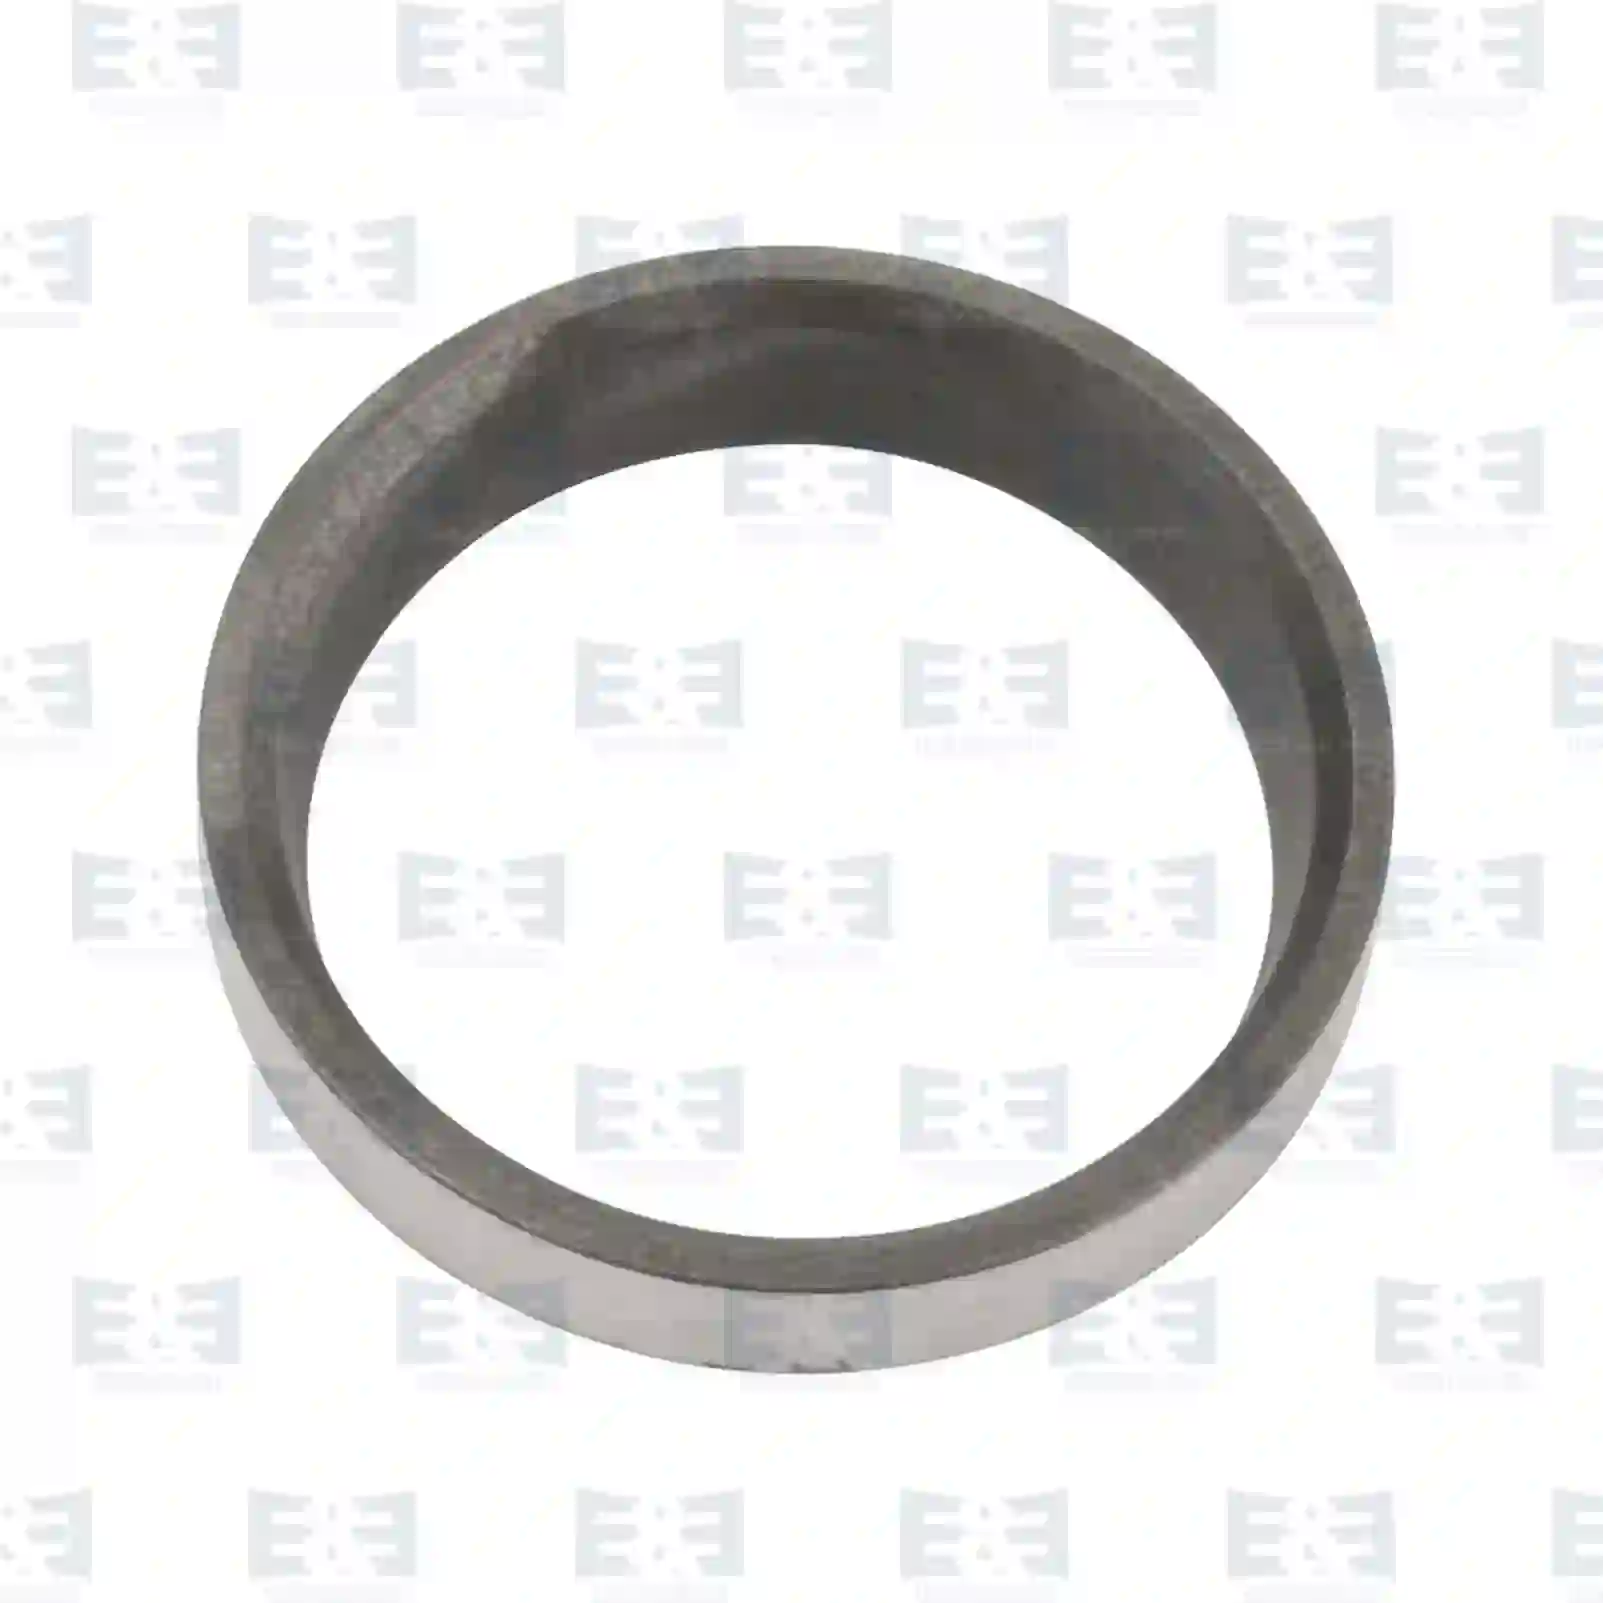  Valve seat ring, exhaust || E&E Truck Spare Parts | Truck Spare Parts, Auotomotive Spare Parts